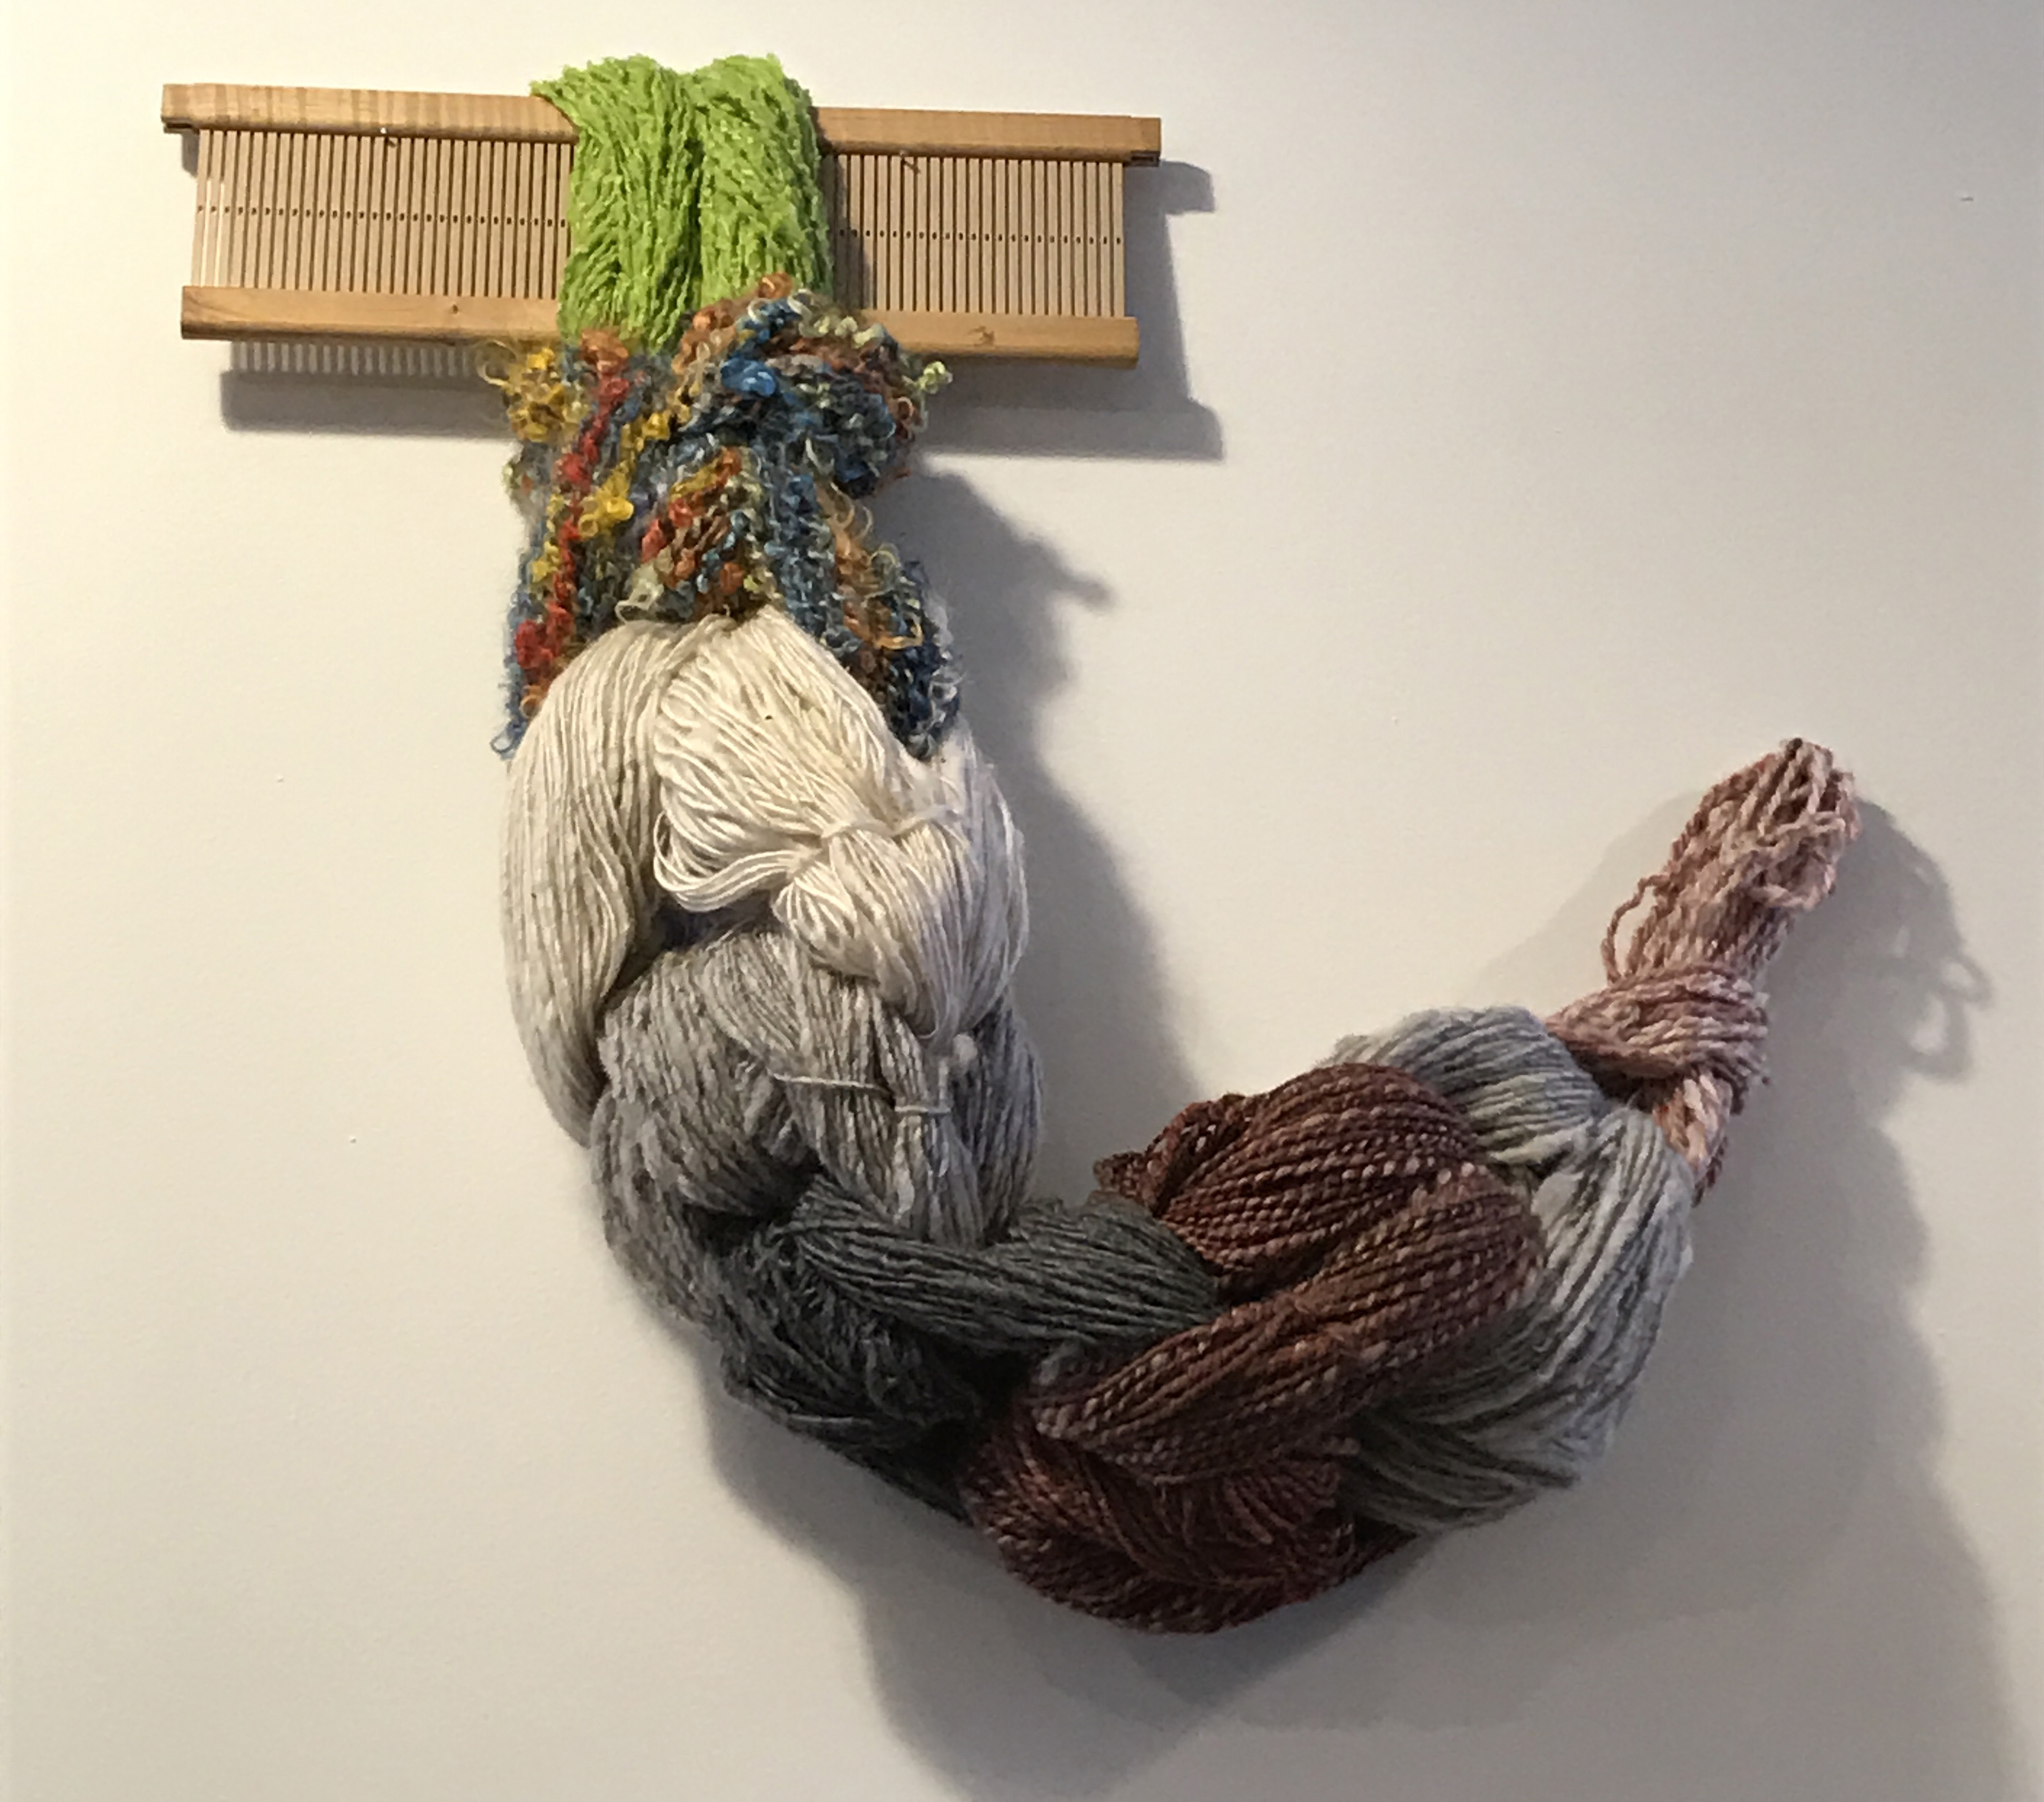 Weavers Guild Wall Exhibit: A First for the Textile Center